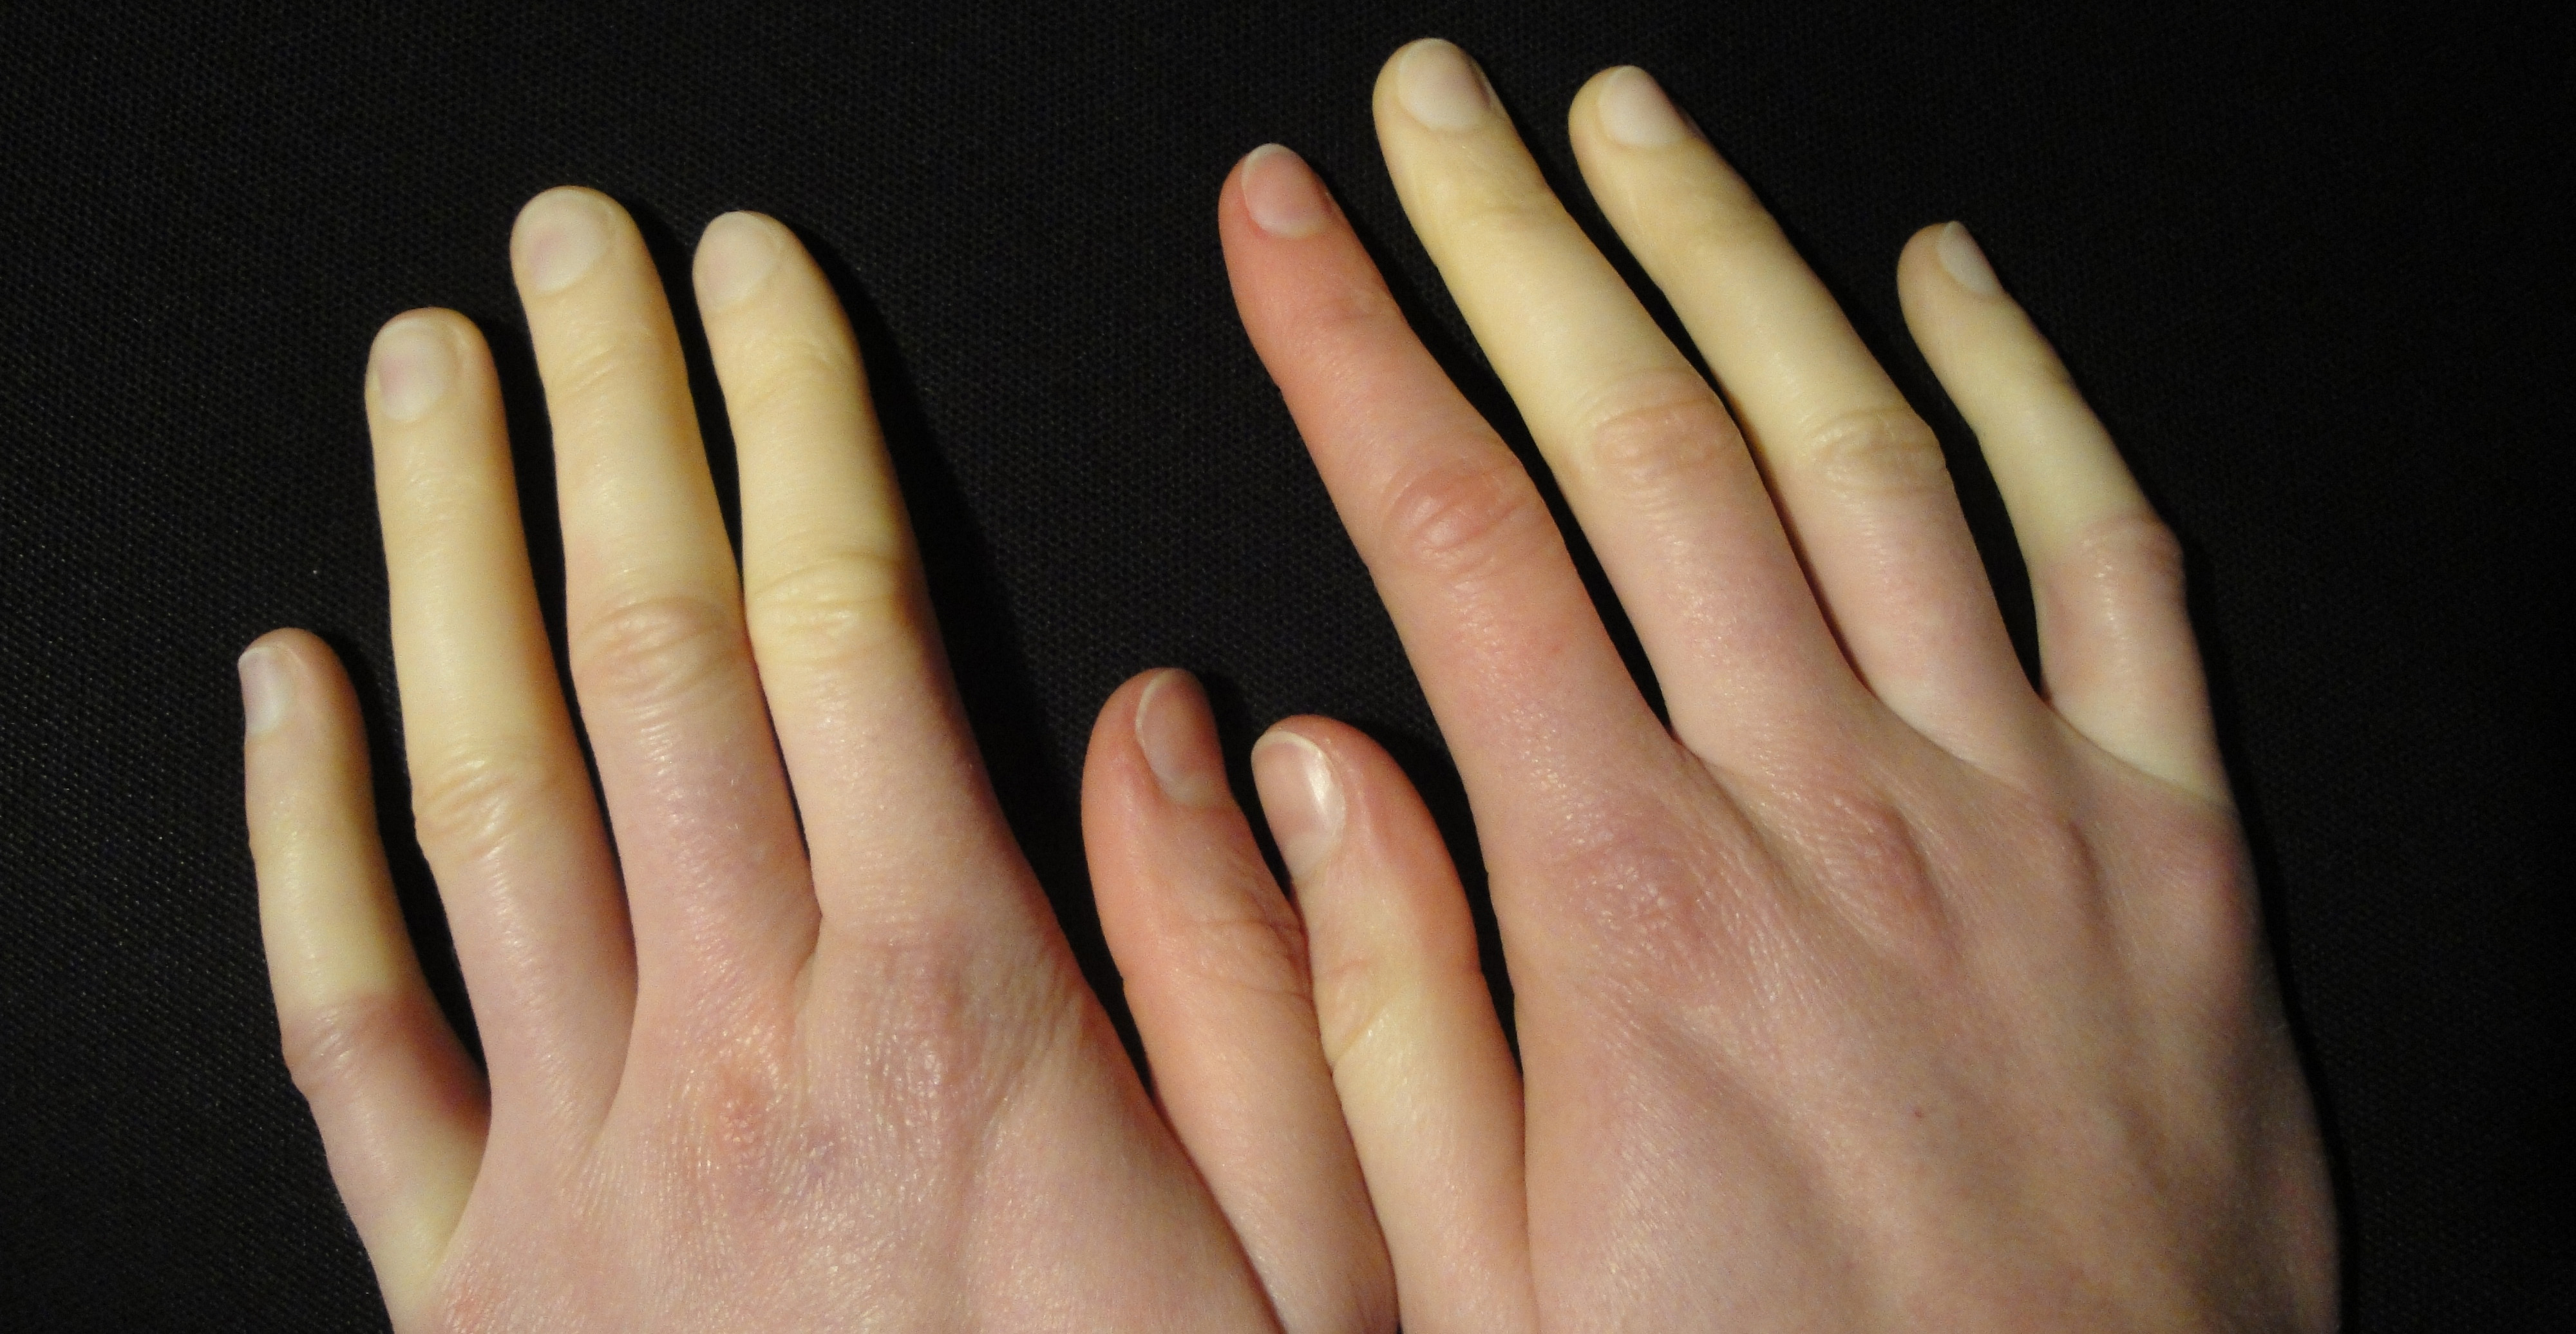 Clinical clues and treatments for Raynaud's - Medical Republic